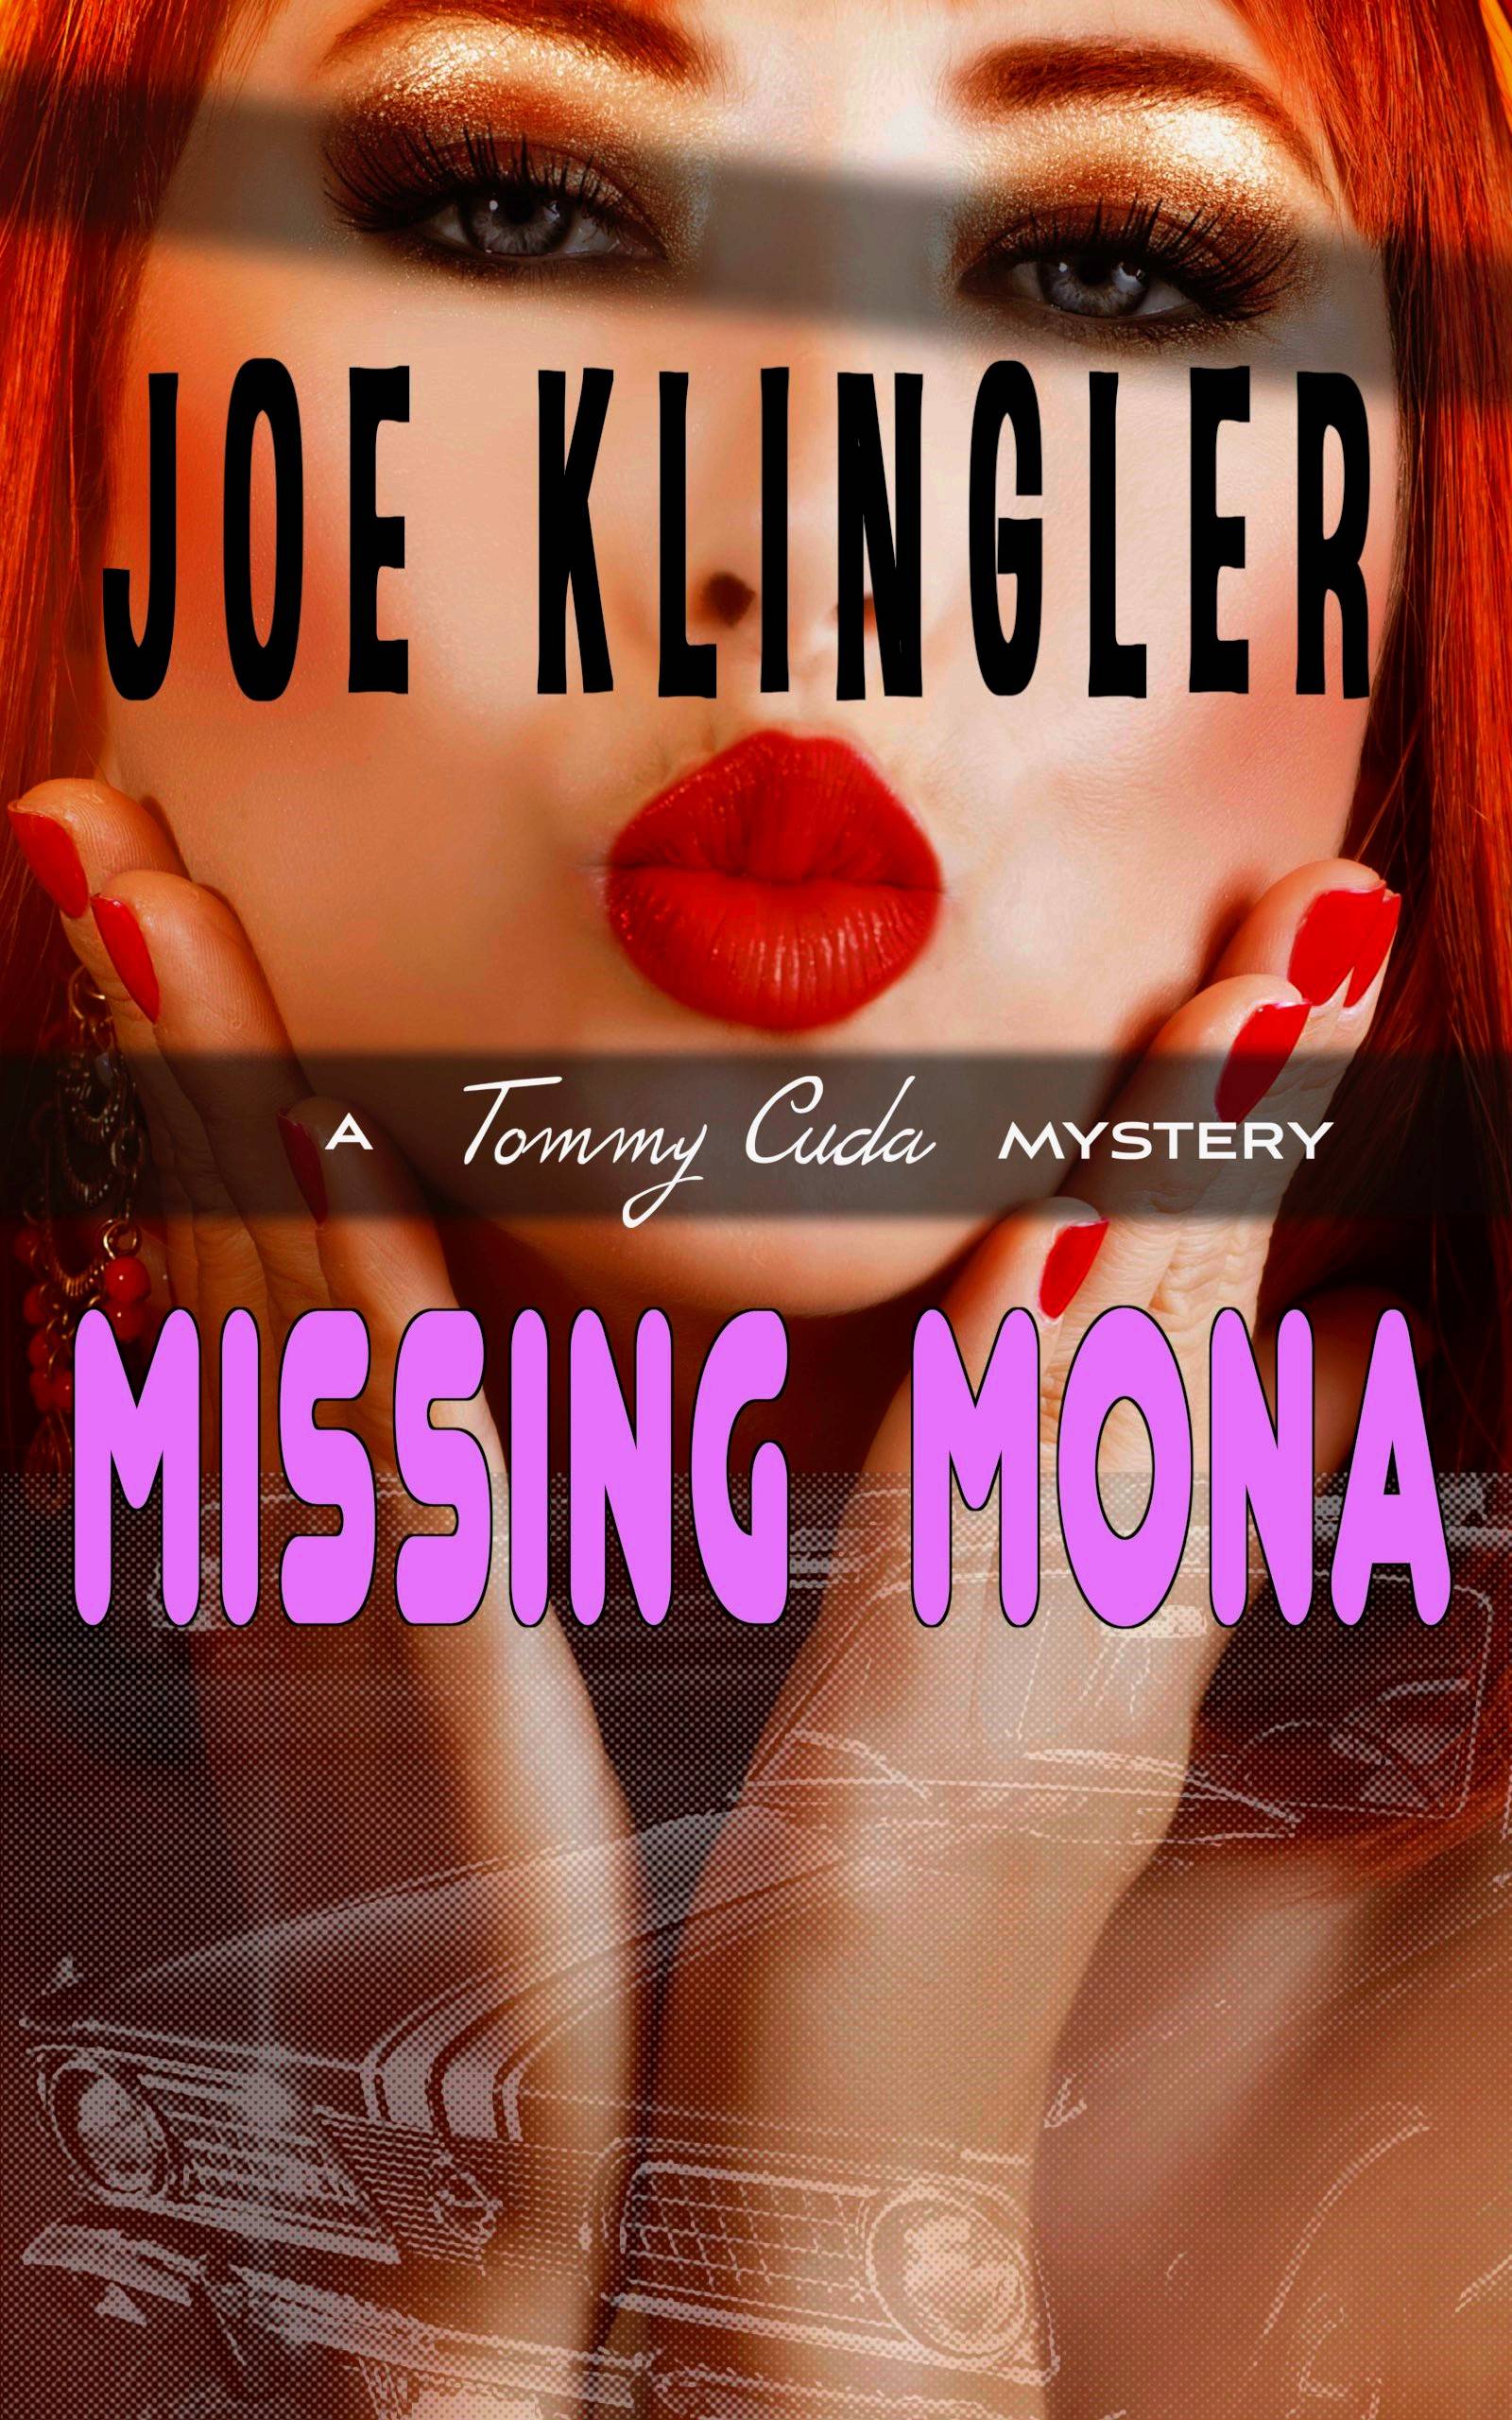 Missing Mona correct cover